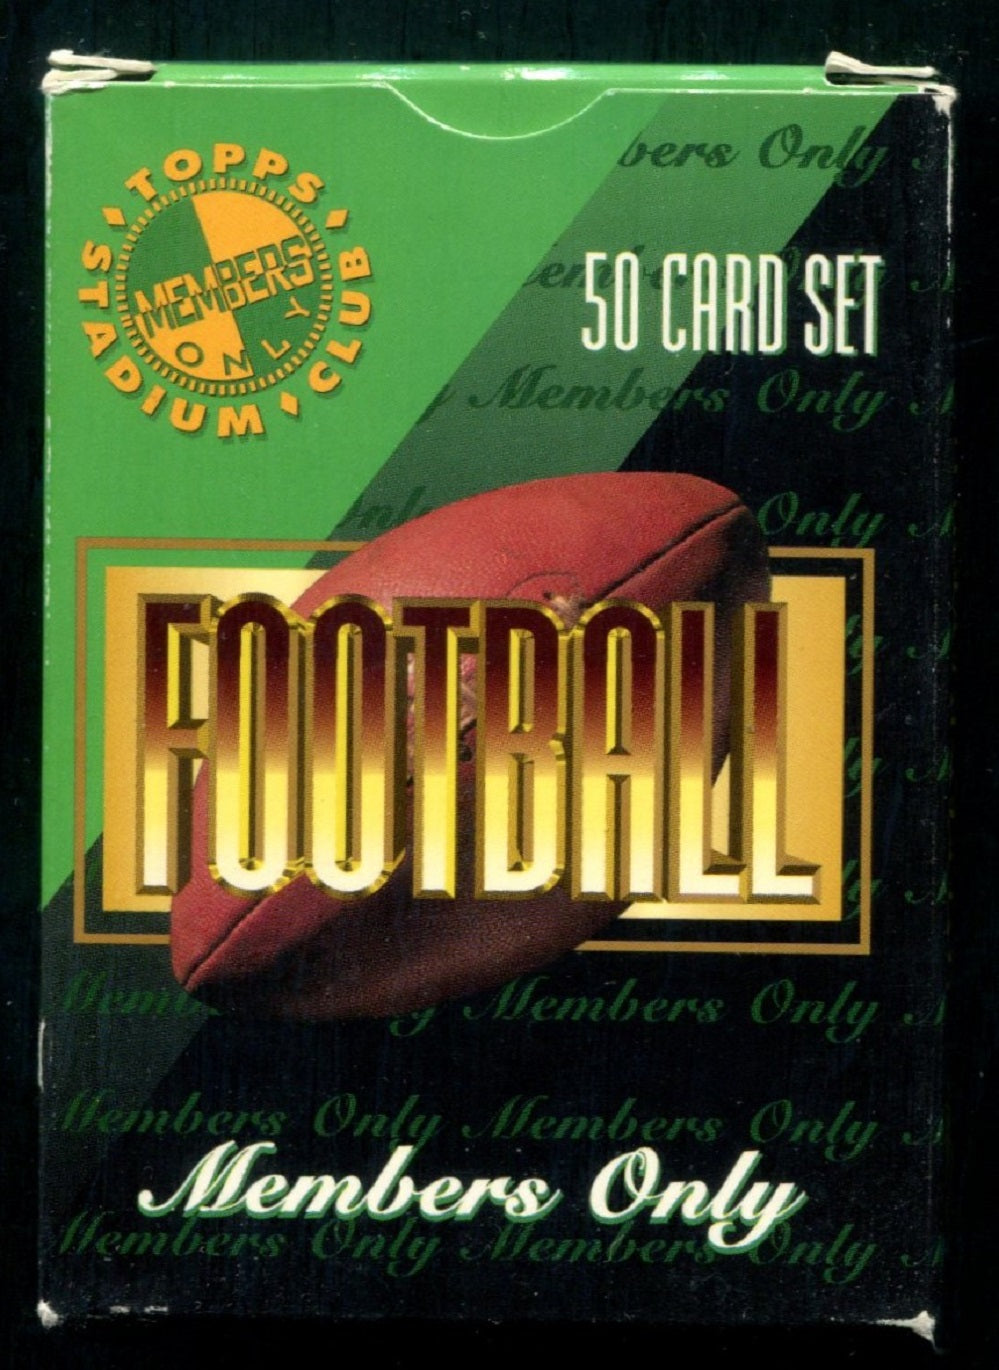 1996 Topps Stadium Club Football Members Only Factory Set (50)